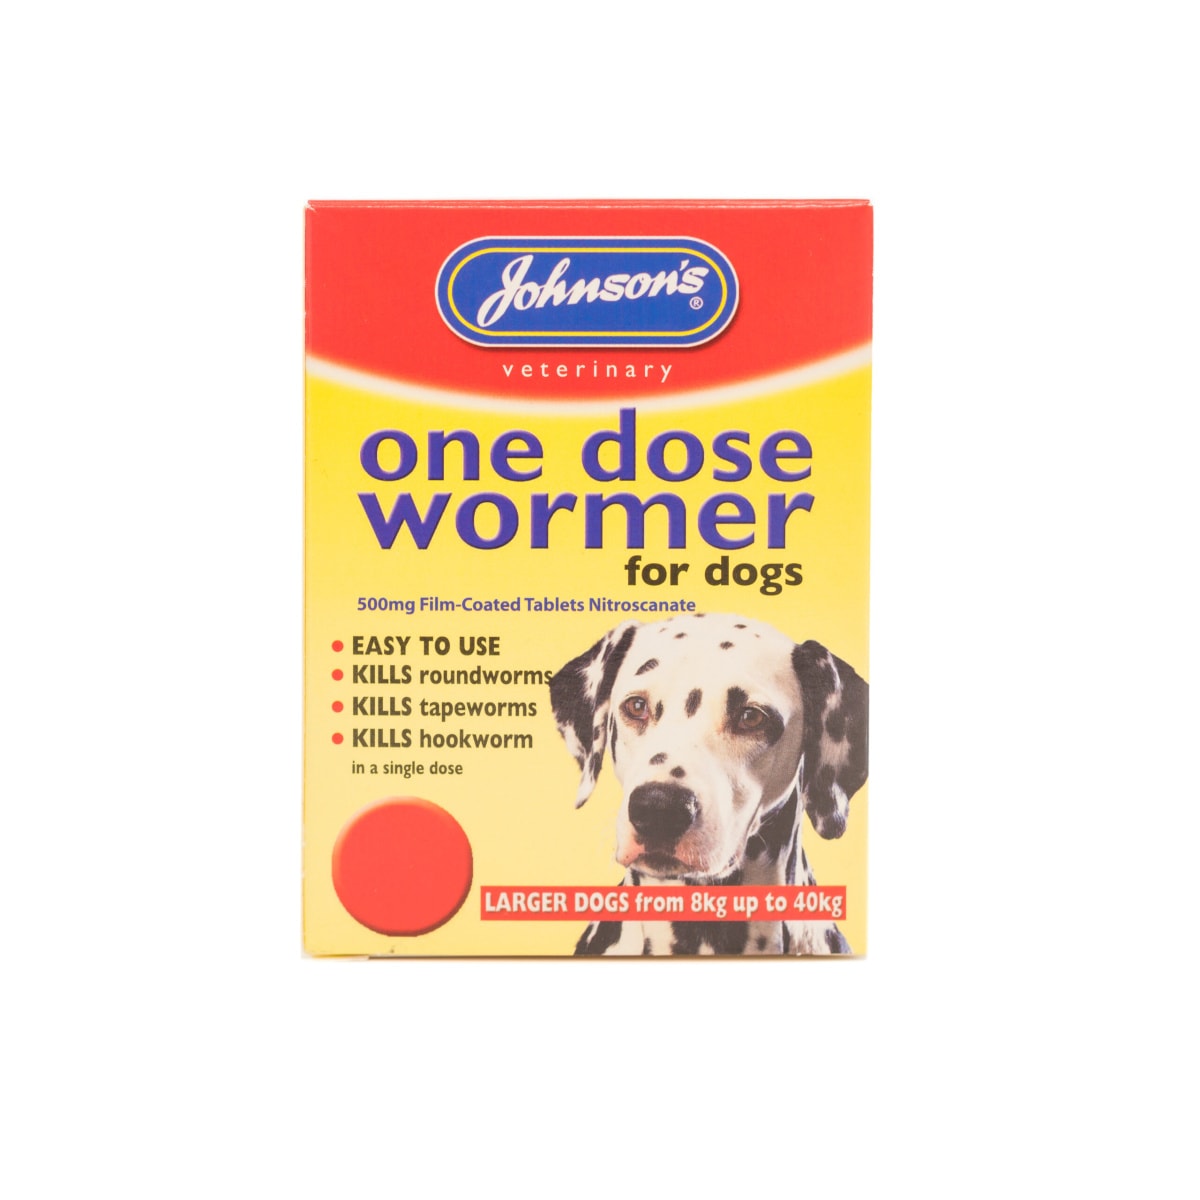 Johnson's One Dose Wormer – Size 3 Main Image